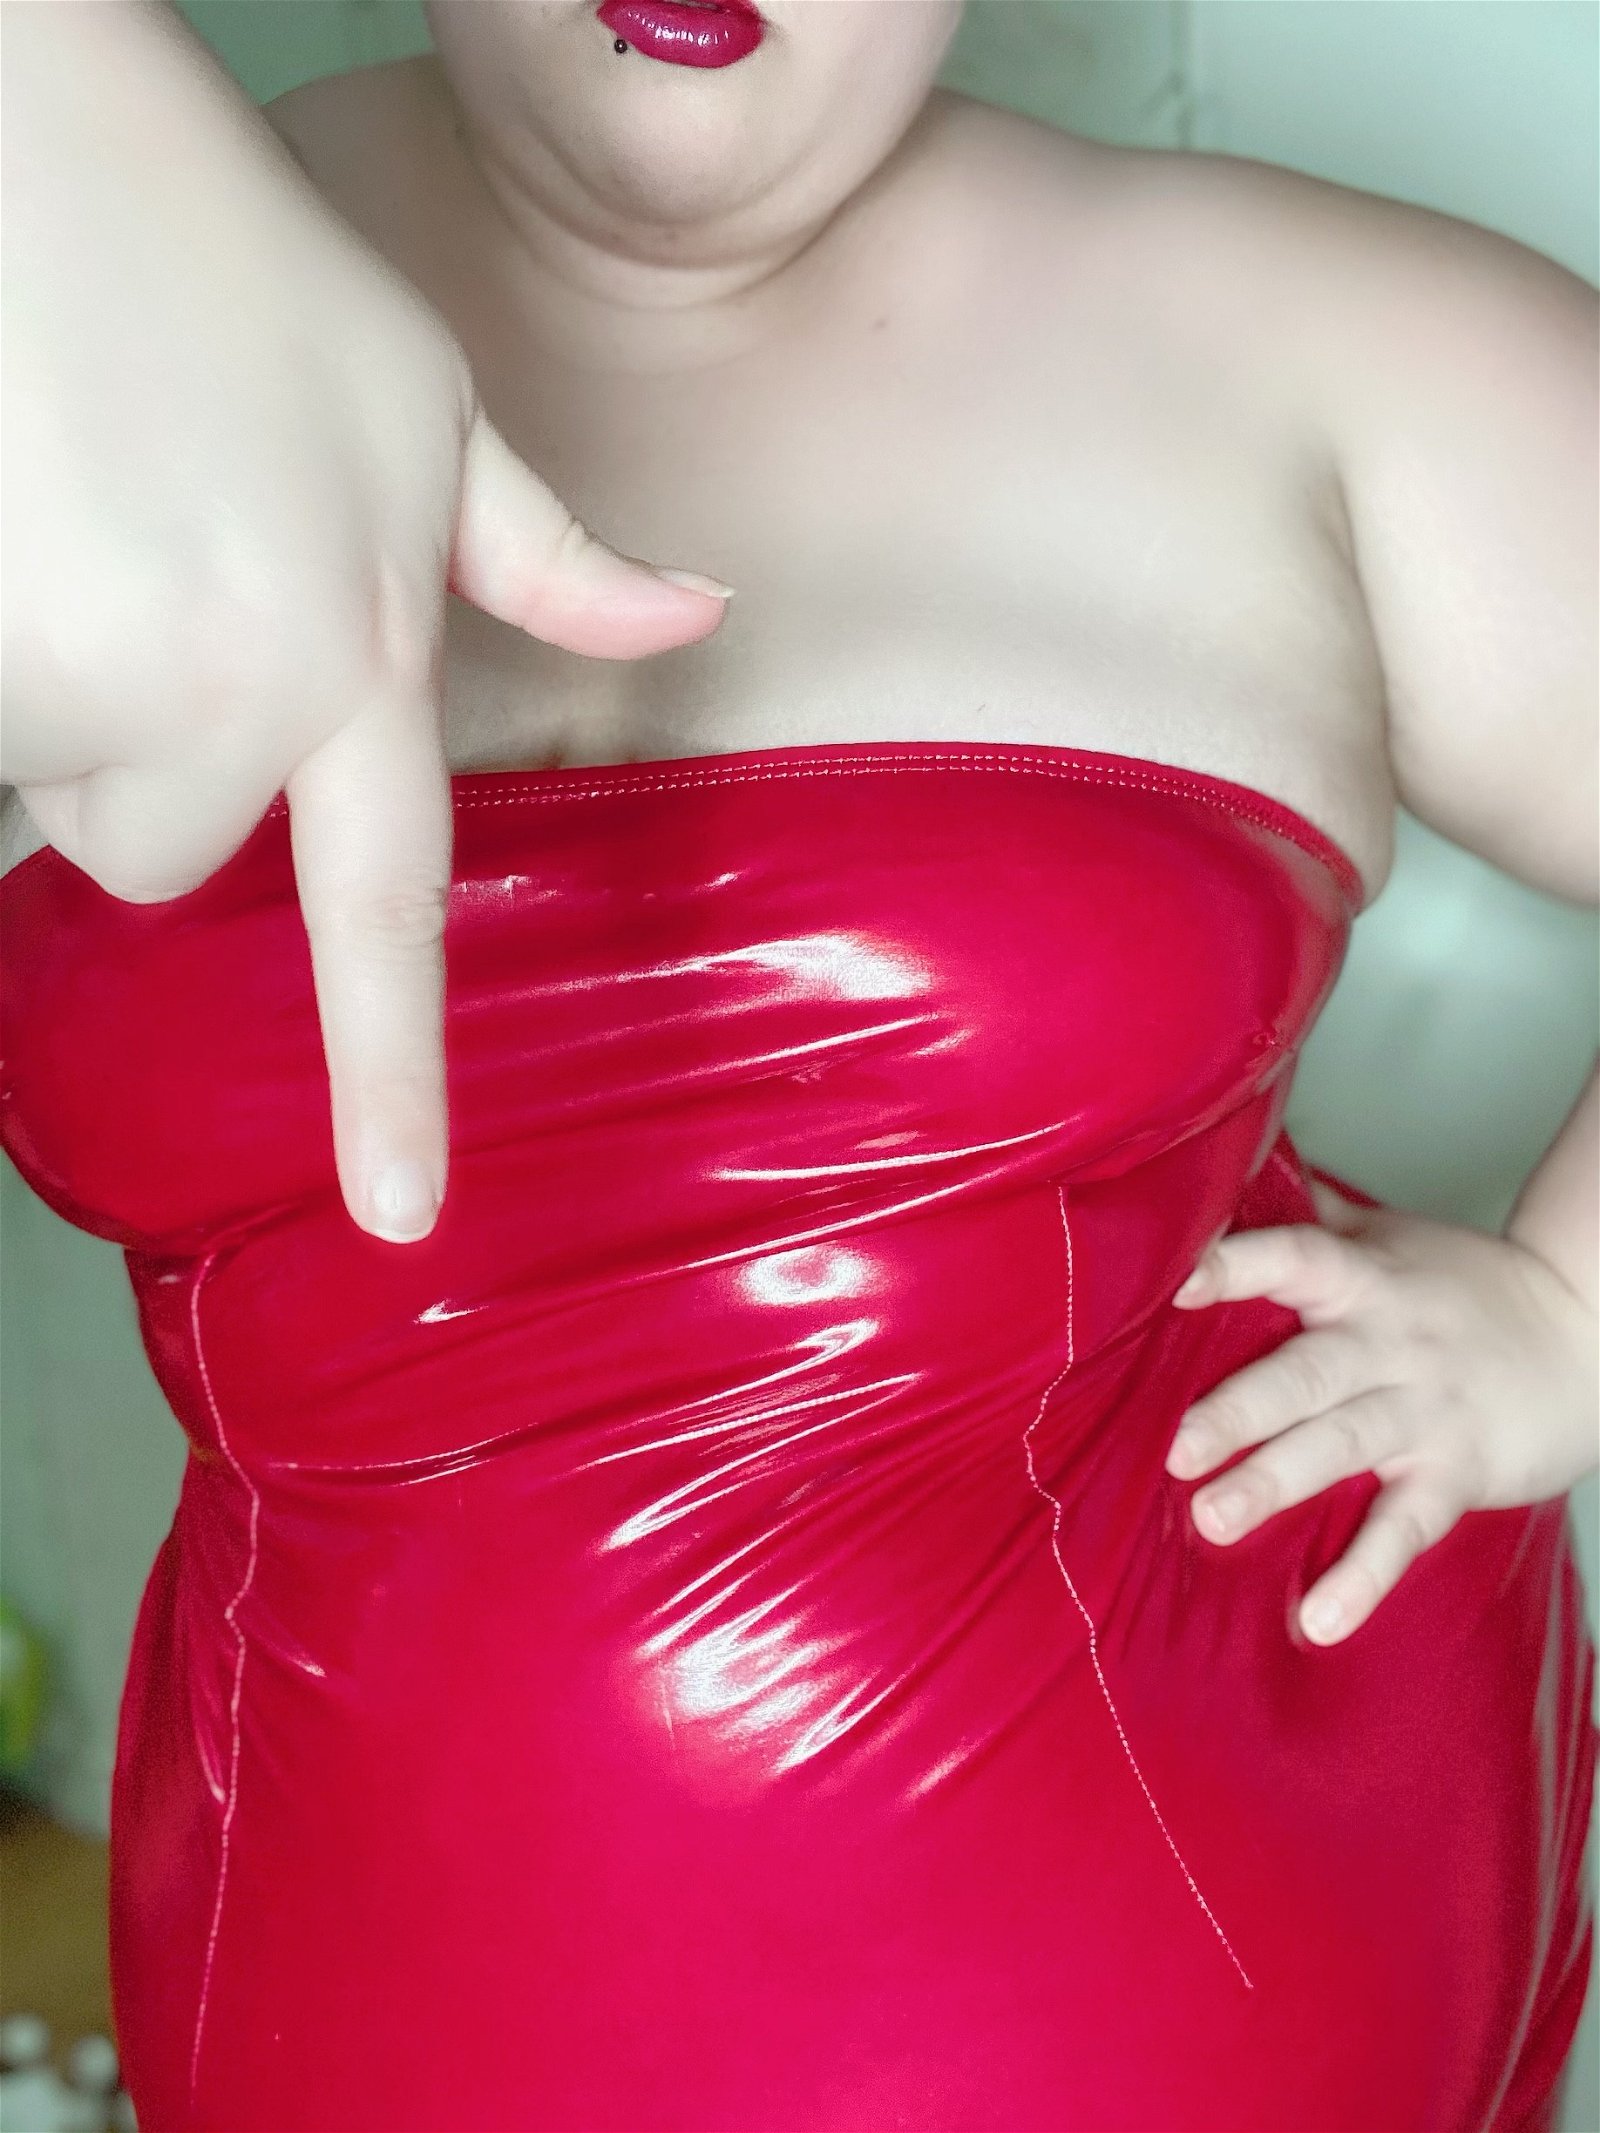 Photo by Honey Cat with the username @HoneyCat, who is a star user,  December 8, 2020 at 4:02 PM. The post is about the topic BBW Findommes and the text says 'get on your knees and kiss my feet. 

yes

this is where you belong'